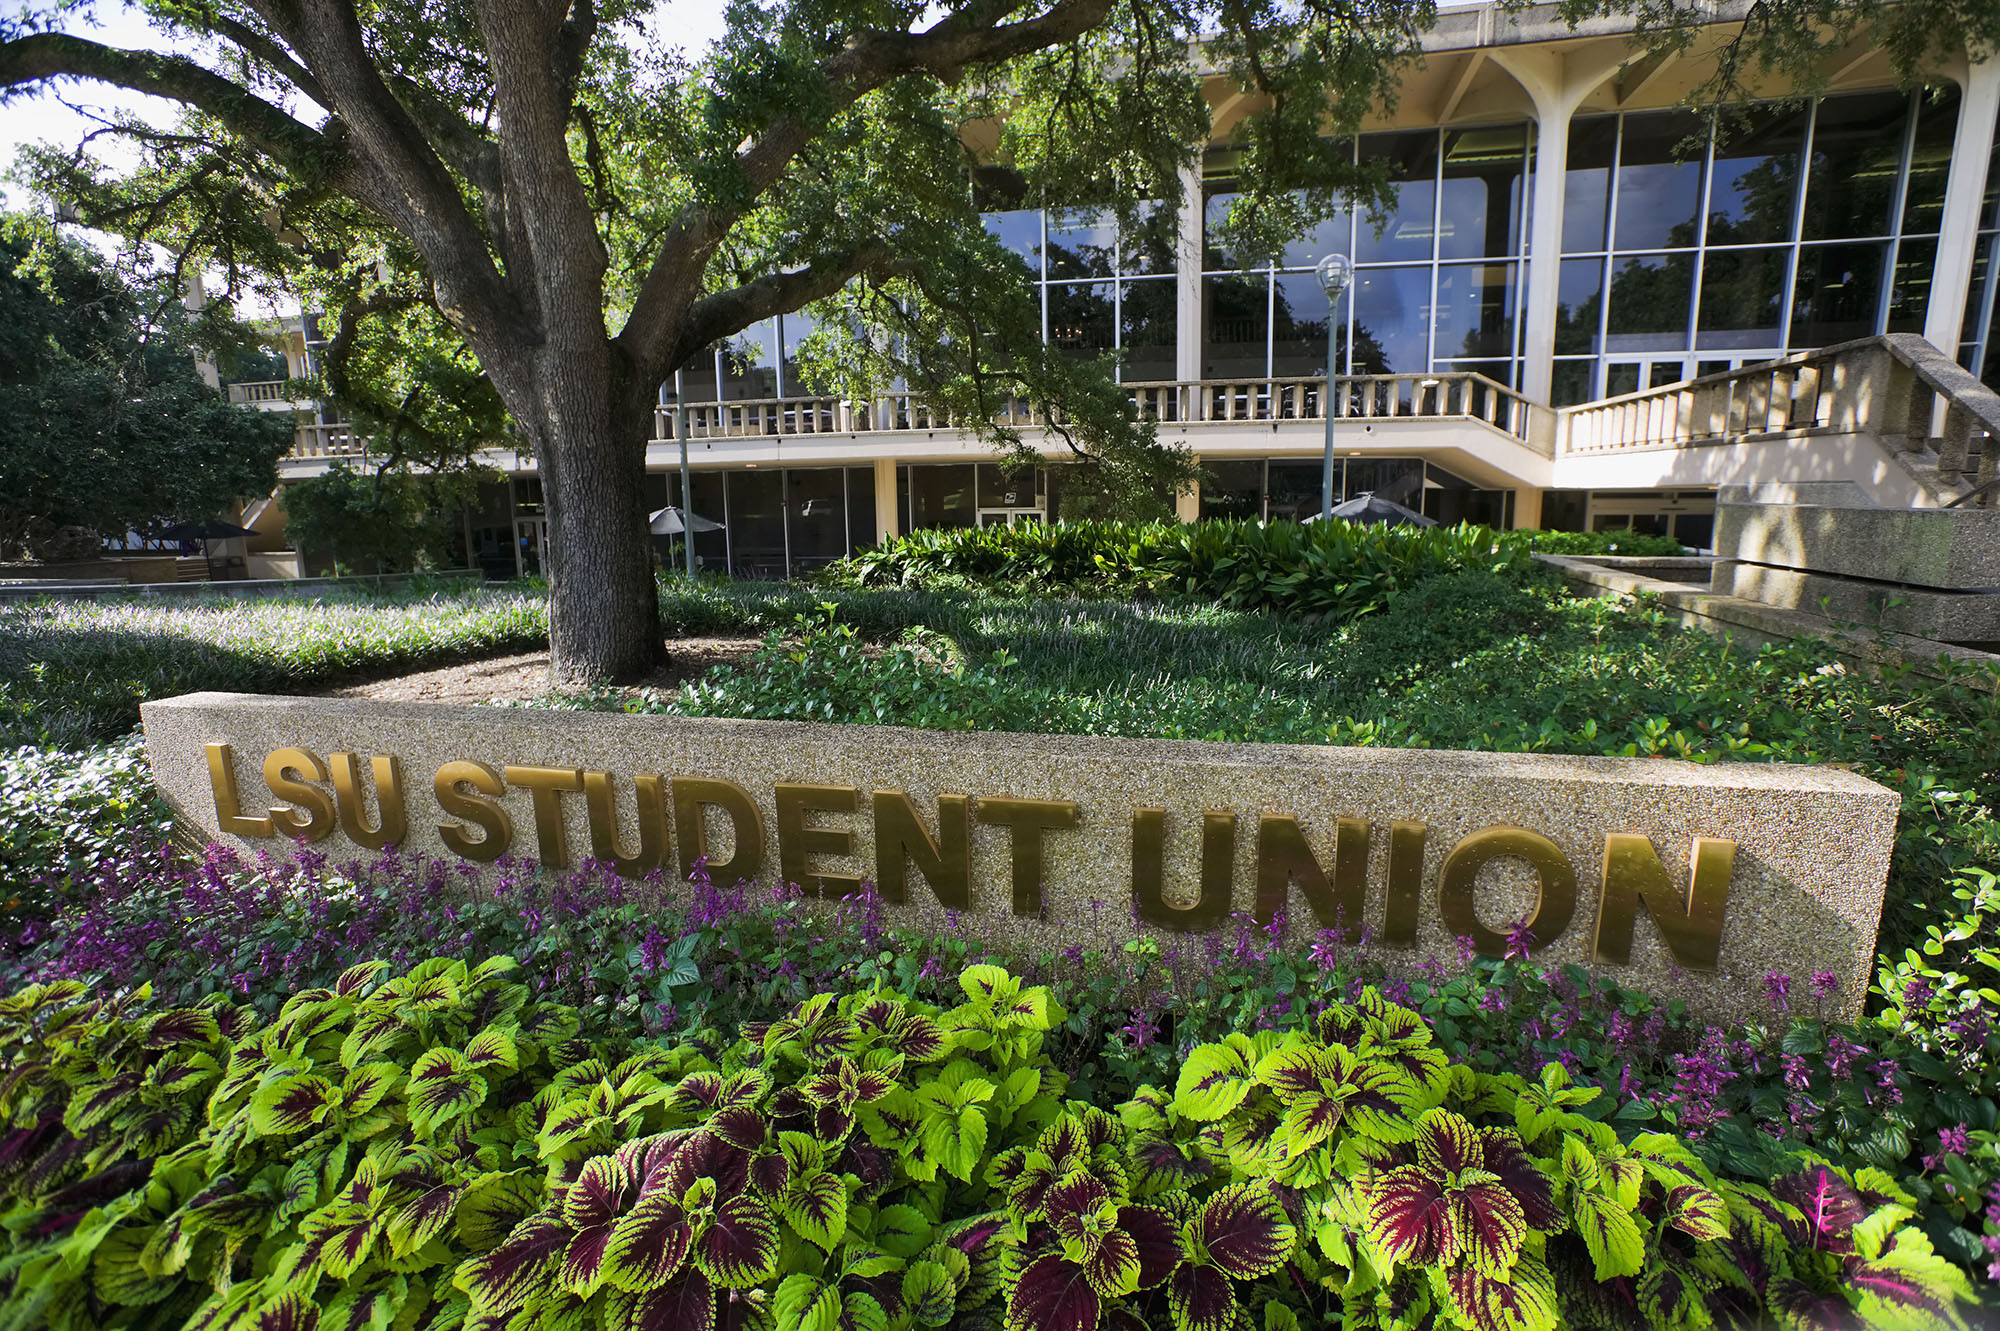 Sign in front of the LSU Student Union